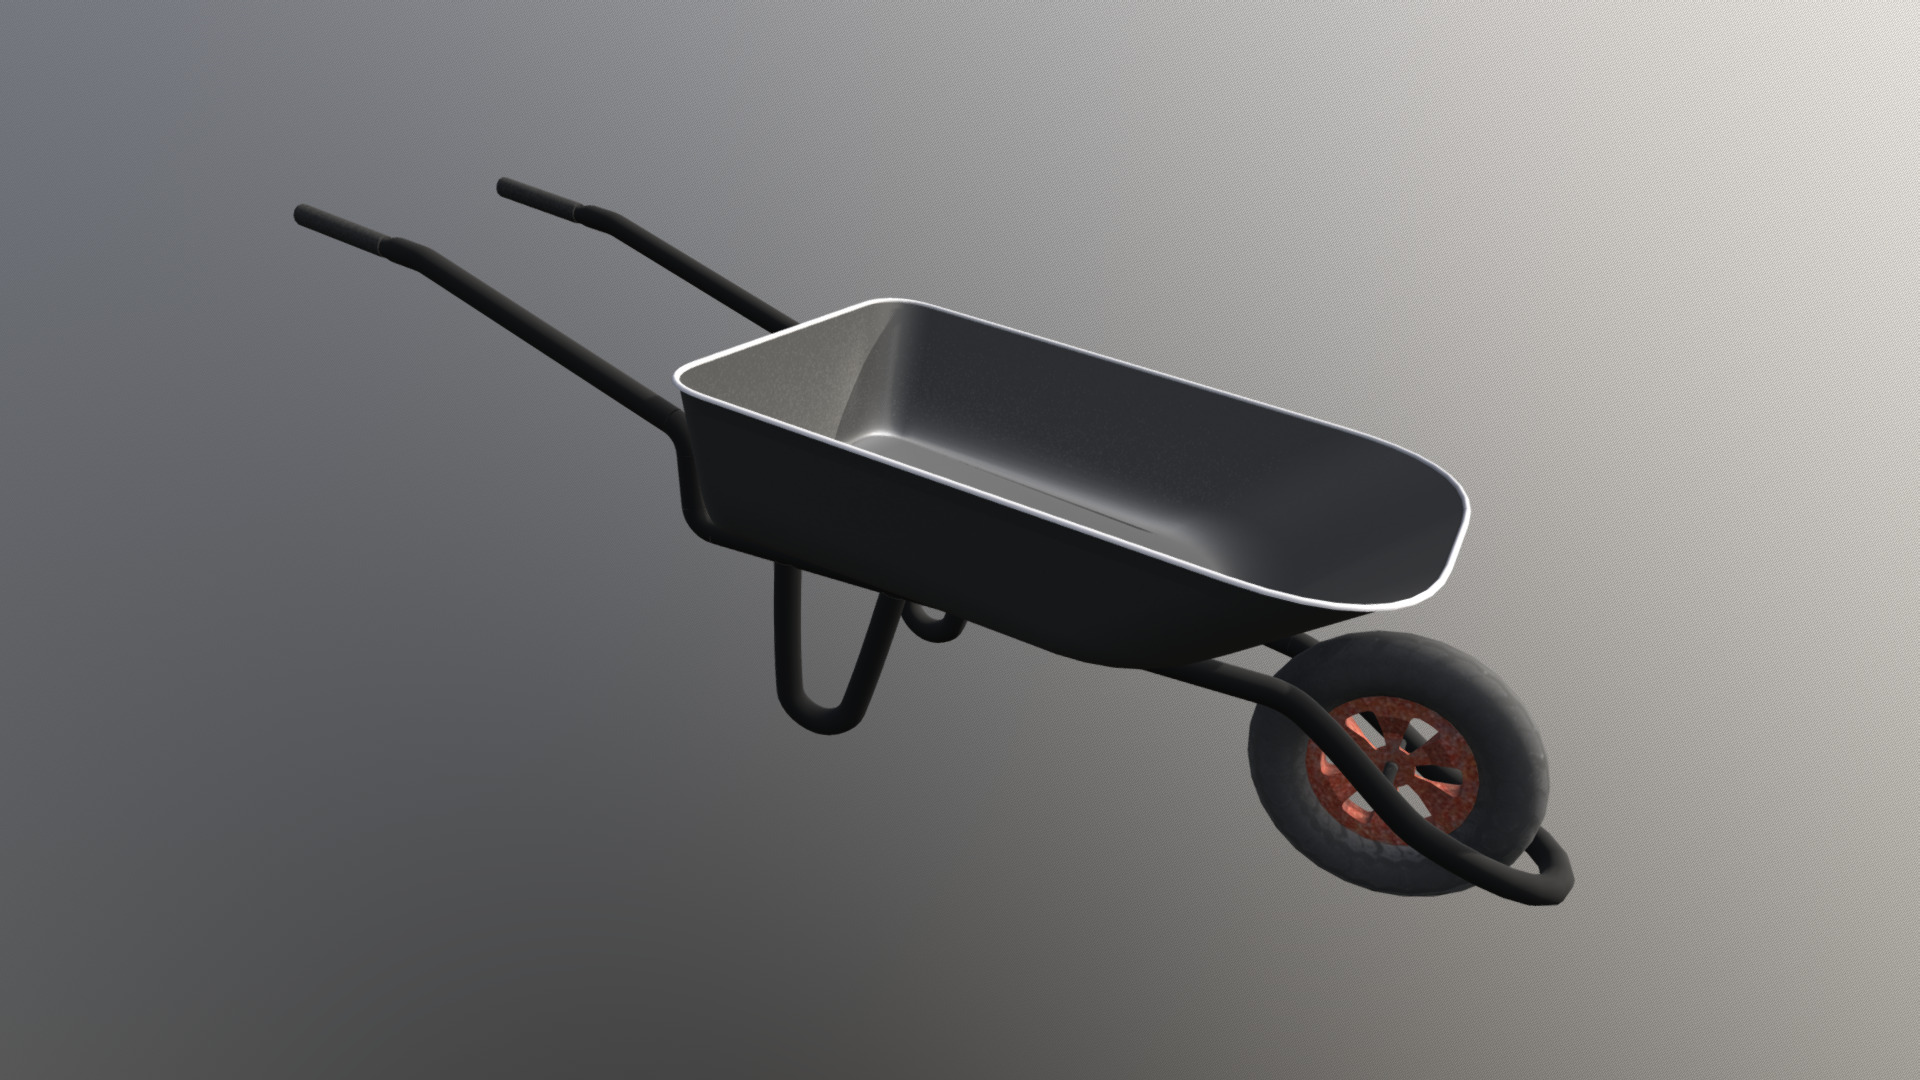 3D model Barrow - This is a 3D model of the Barrow. The 3D model is about a black and silver exercise machine.